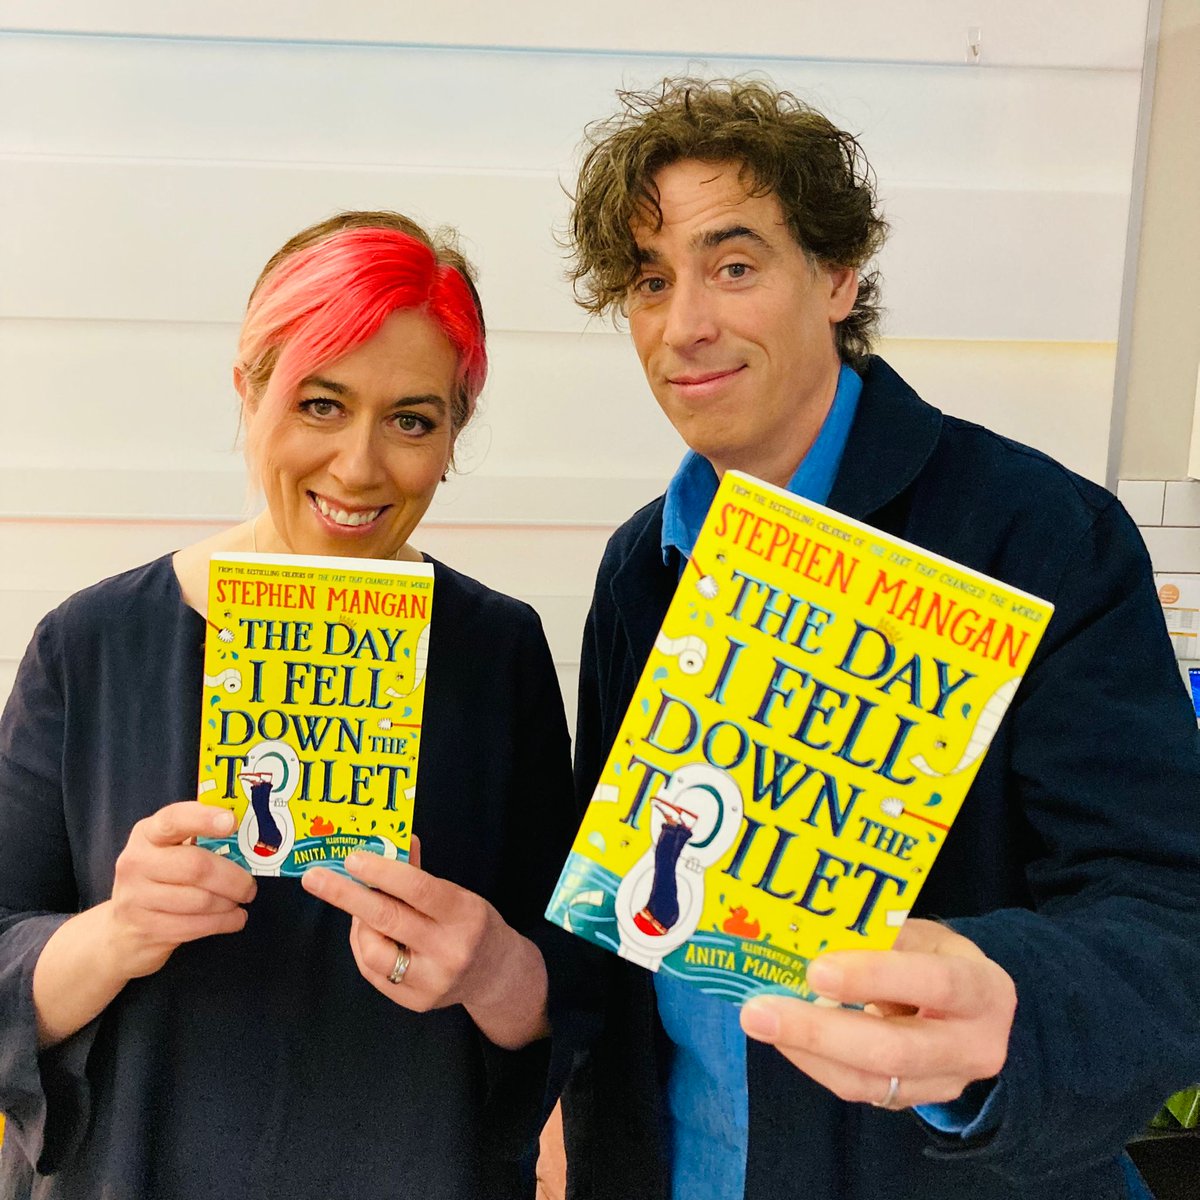 Join @StephenMangan and Anita Mangan @Neeneelou at @hayfestival for a must-see family show Sat 25 May @ 4pm ⭐️Funny stories ⭐️Hilarious games ⭐️Drawalong ⭐️Book signing ⭐️Perfect for 7 to 107 #TheDayIFellDownTheToilet Book this w/e for NO BOOKING FEE! hayfestival.com/p-21473-stephe…